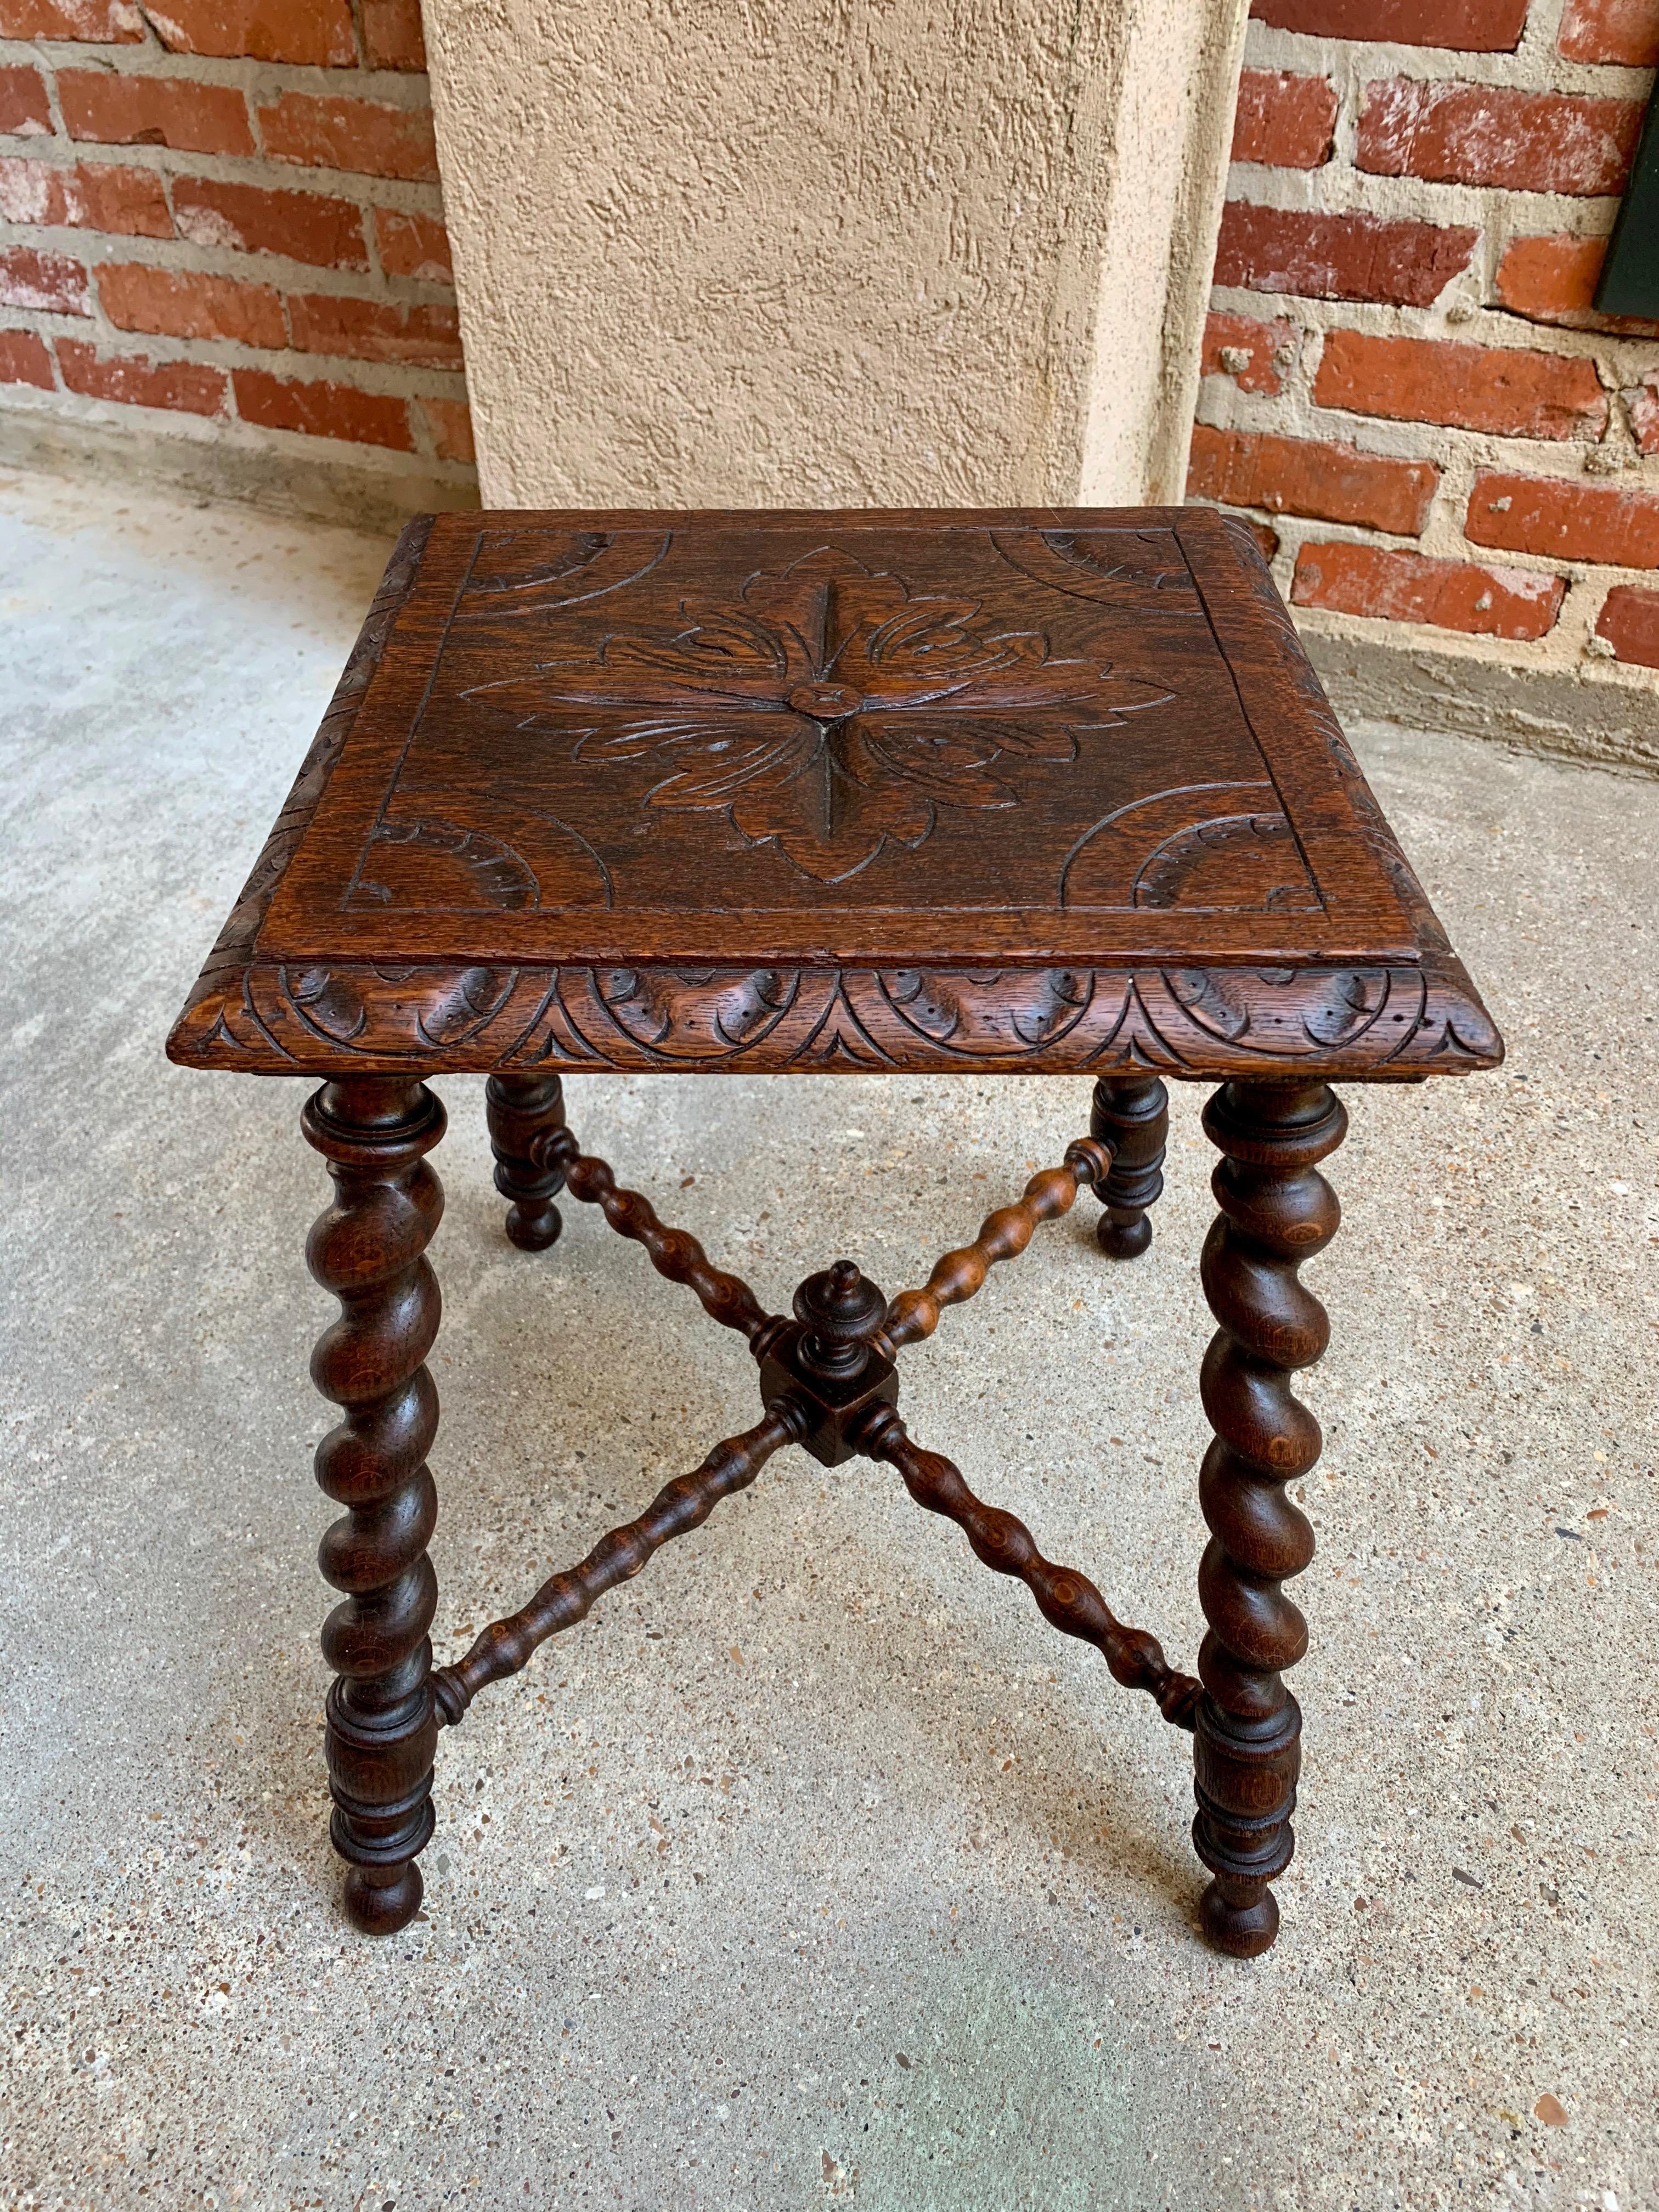 Hand-Carved Antique English Carved Oak Barley Twist Bench Stool Kettle Stand Table